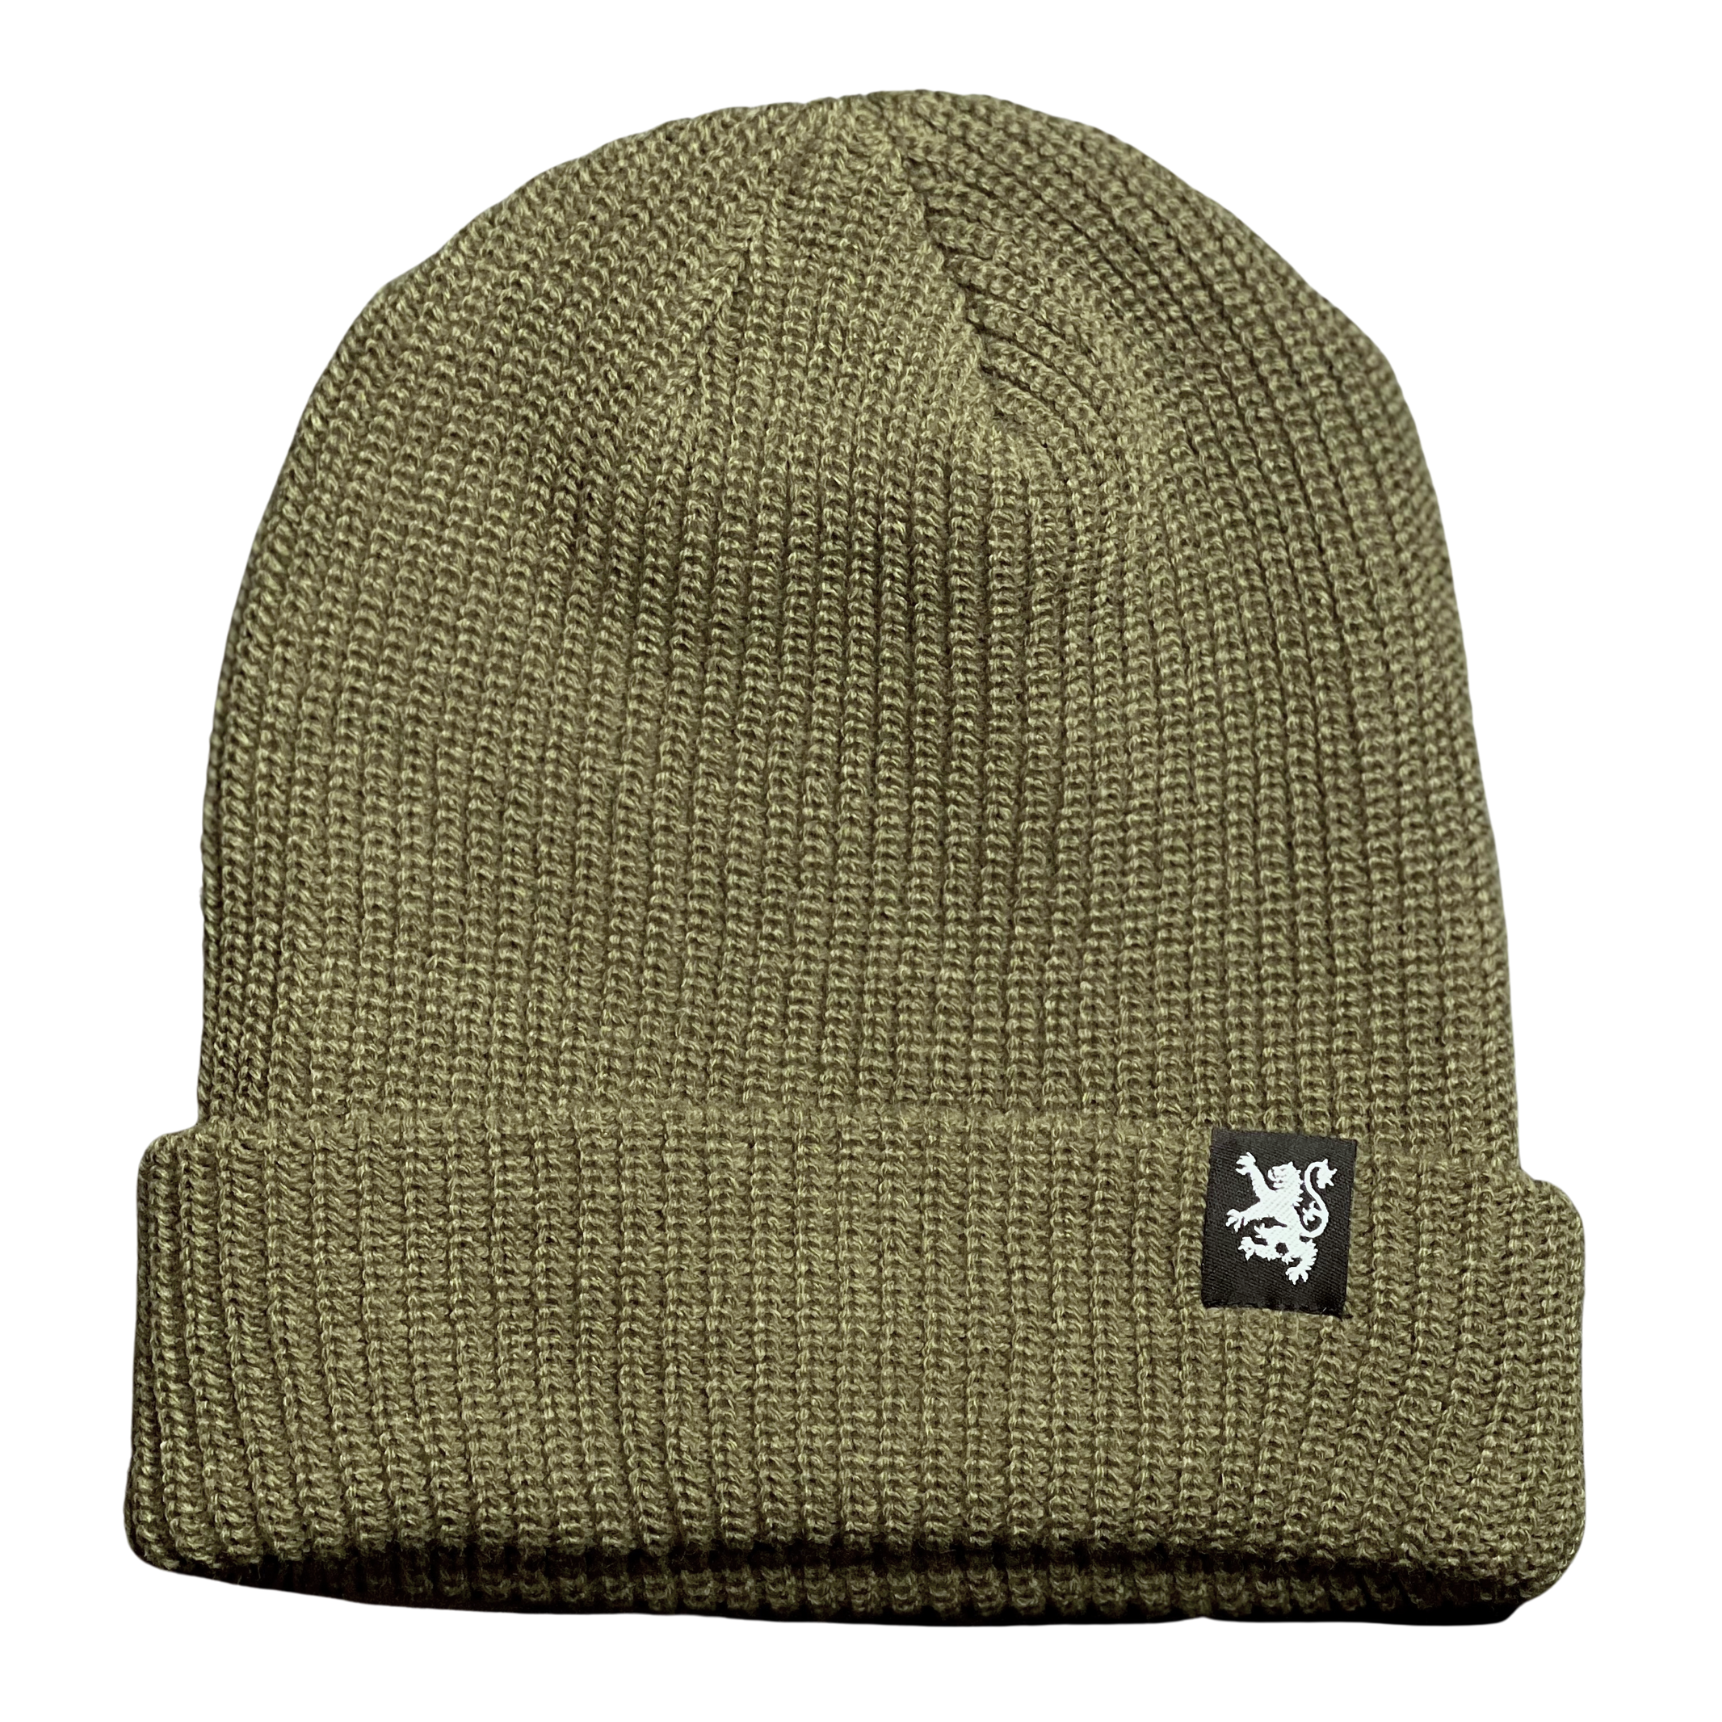 New Scotland Clothing Co. Premium Waffle Knit Toque in Olive